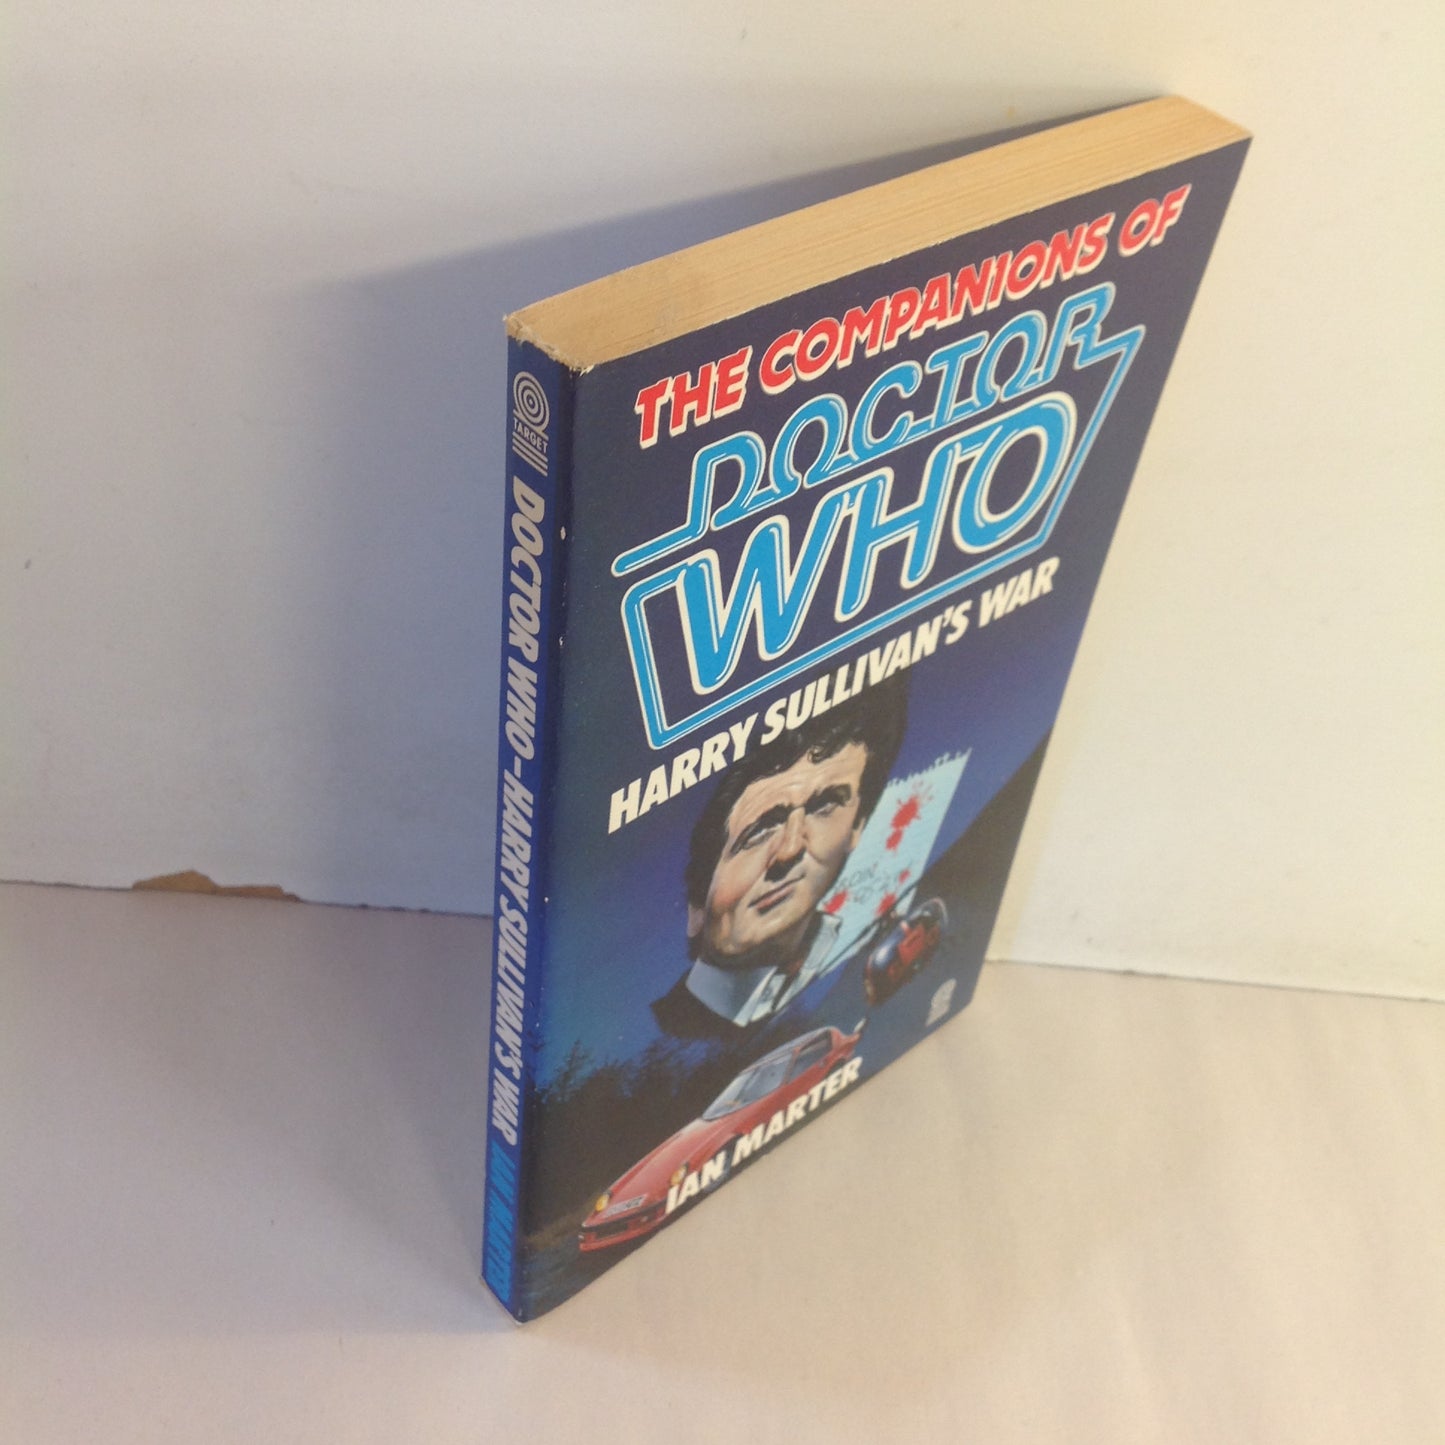 Vintage 1986 Mass Market Paperback The Companions of Doctor Who: Harry Sullivan's War Ian Marter First Edition